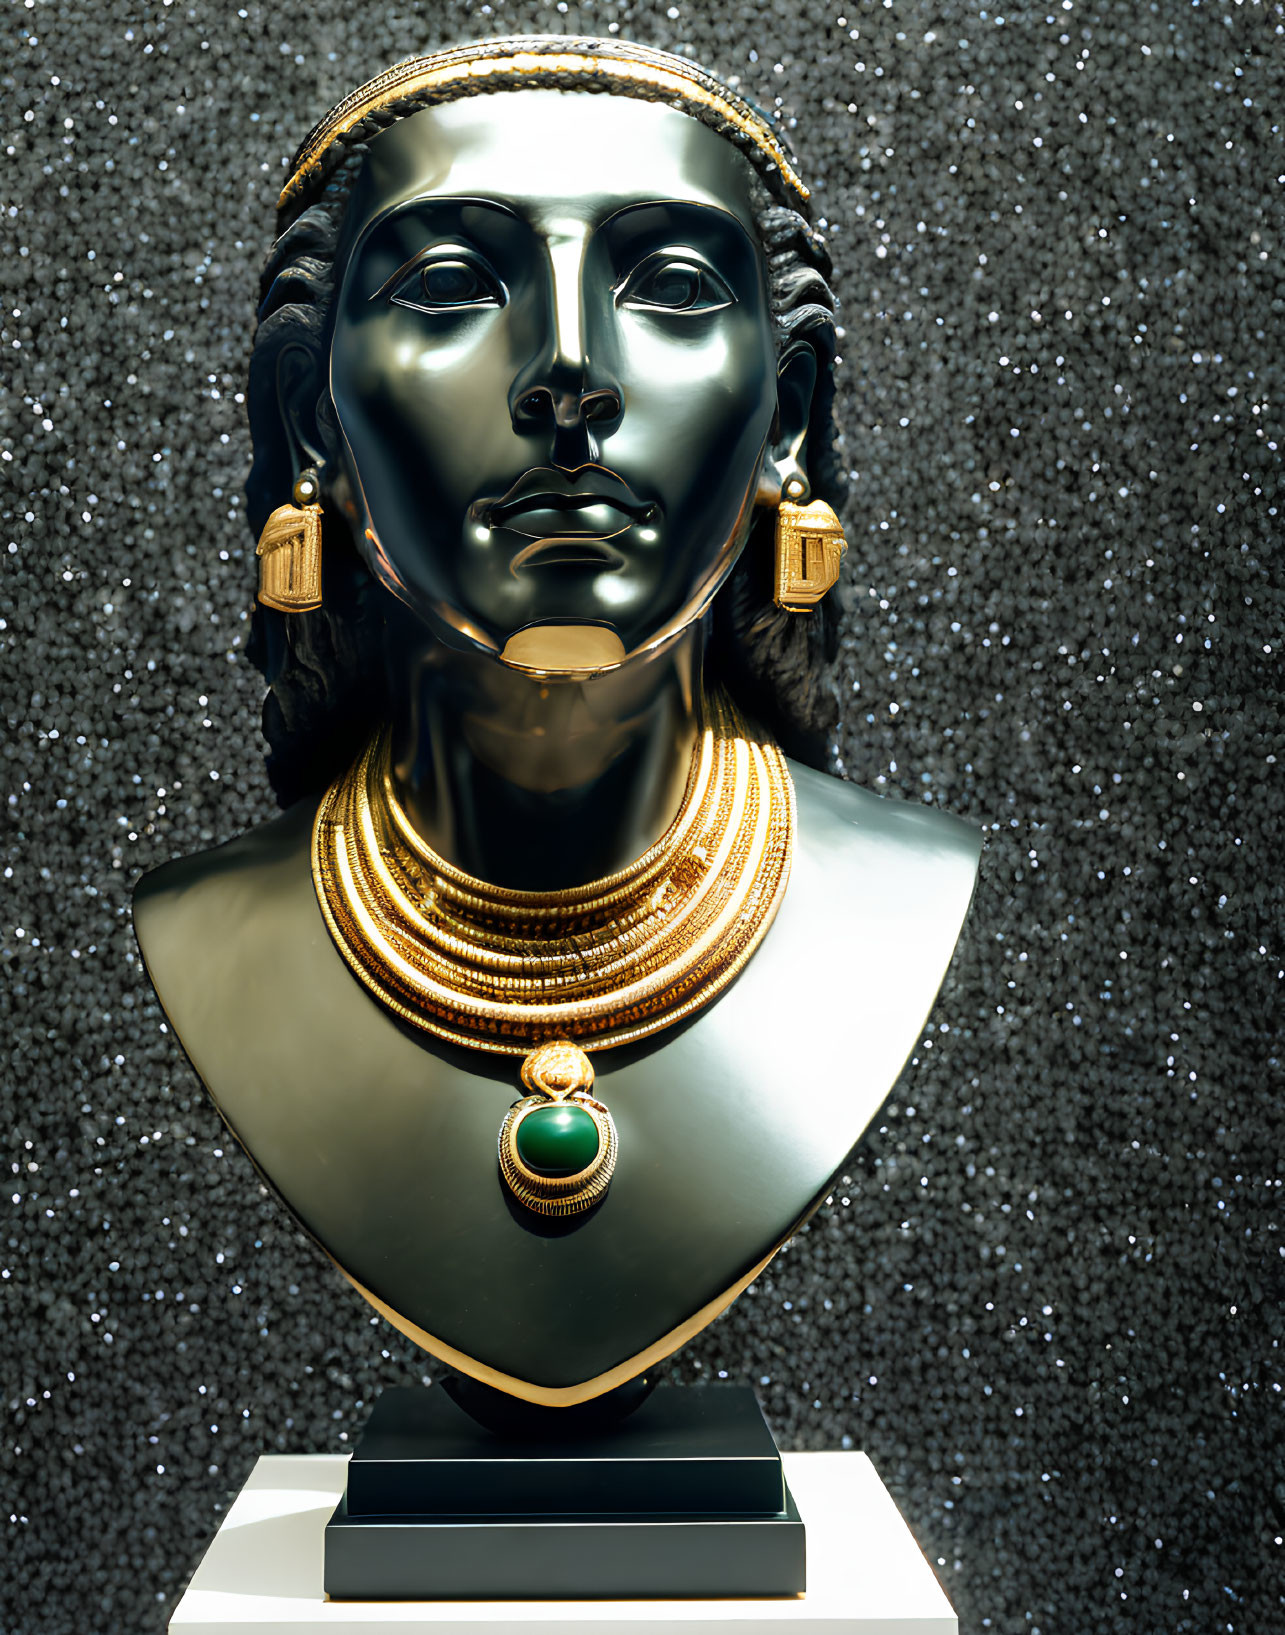 Shiny black bust with gold jewelry on glittery background